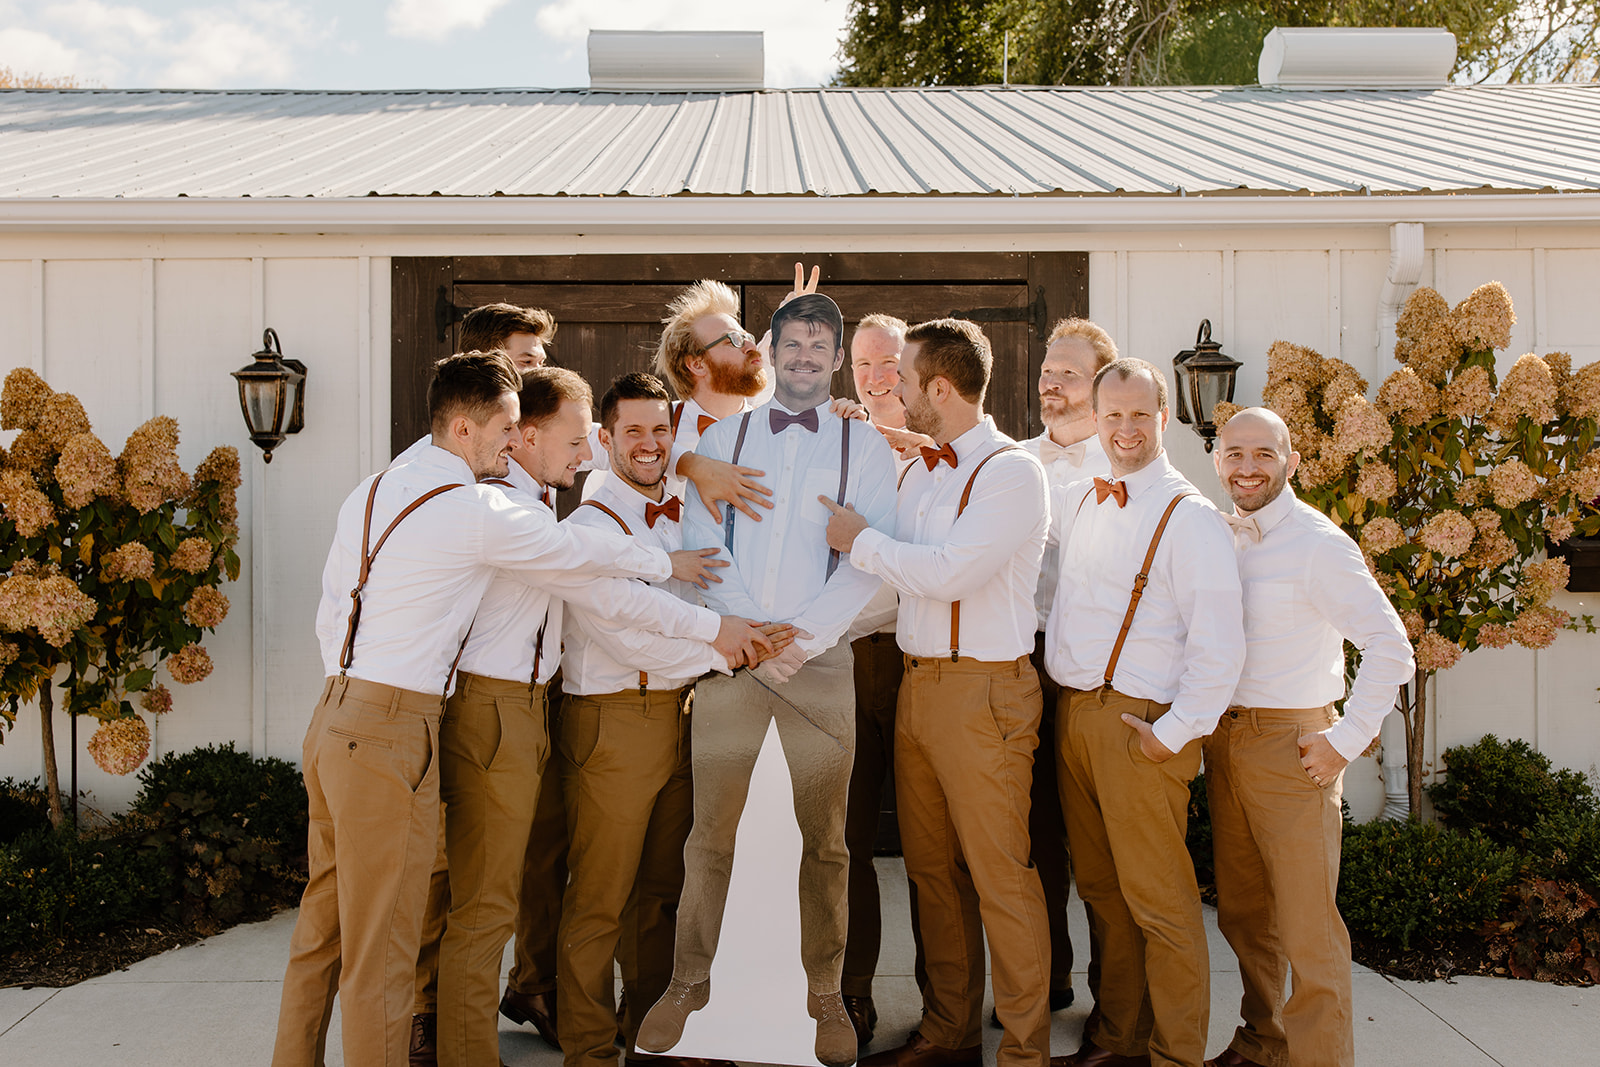 Groomsmen hold up a cardboard cut out of a groomsmen